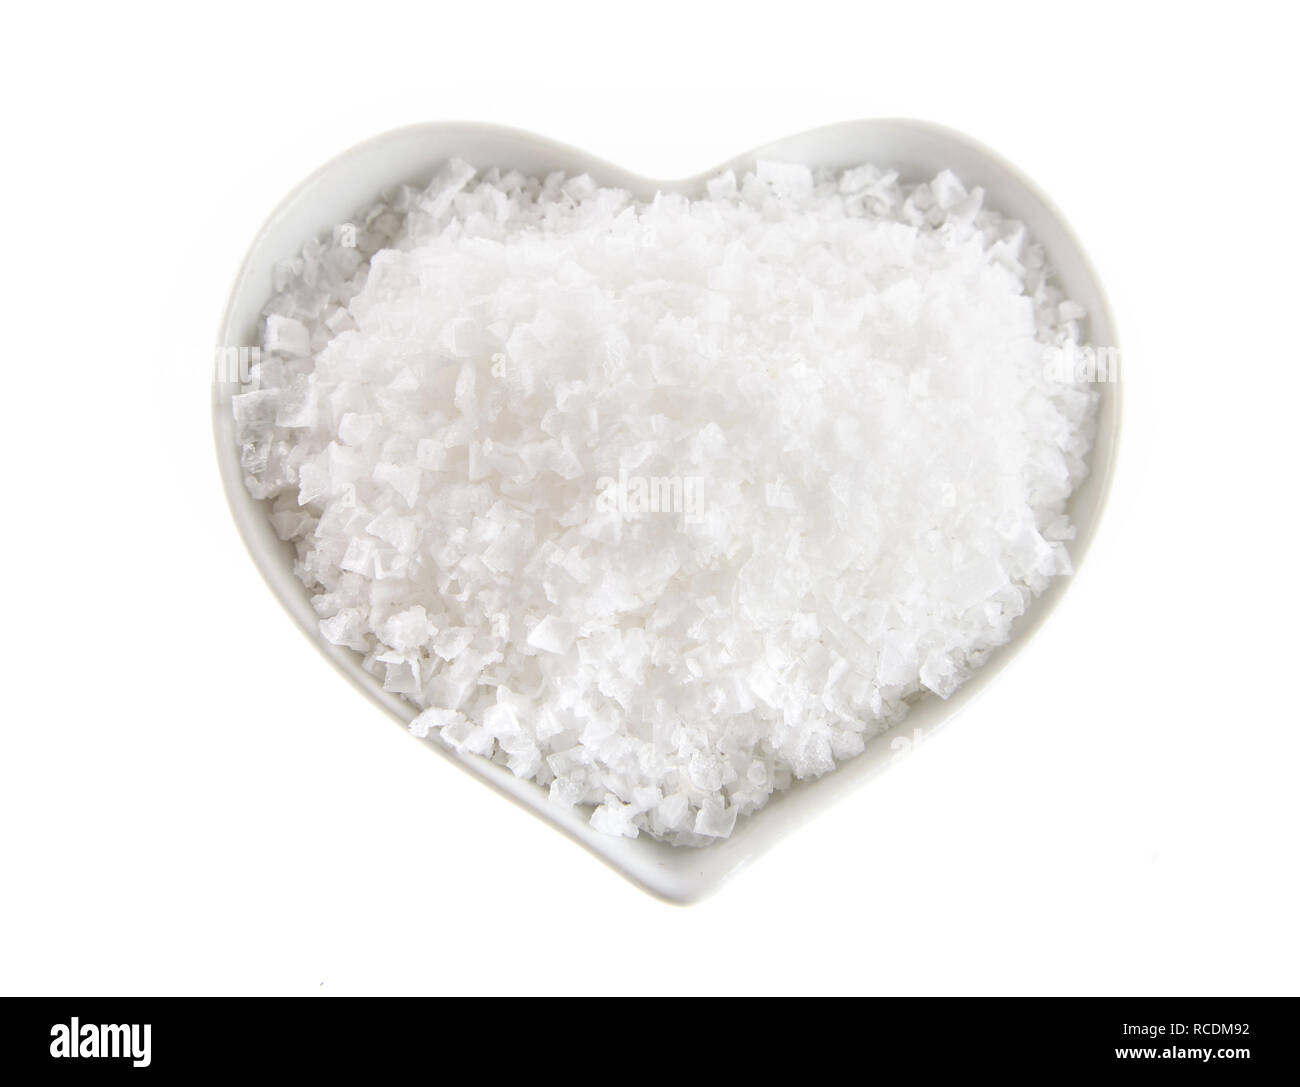 Heart shaped bowl of Flor de Sal, a Portuguese salt derived from the evaporation of sea water, viewed from above isolated on white Stock Photo